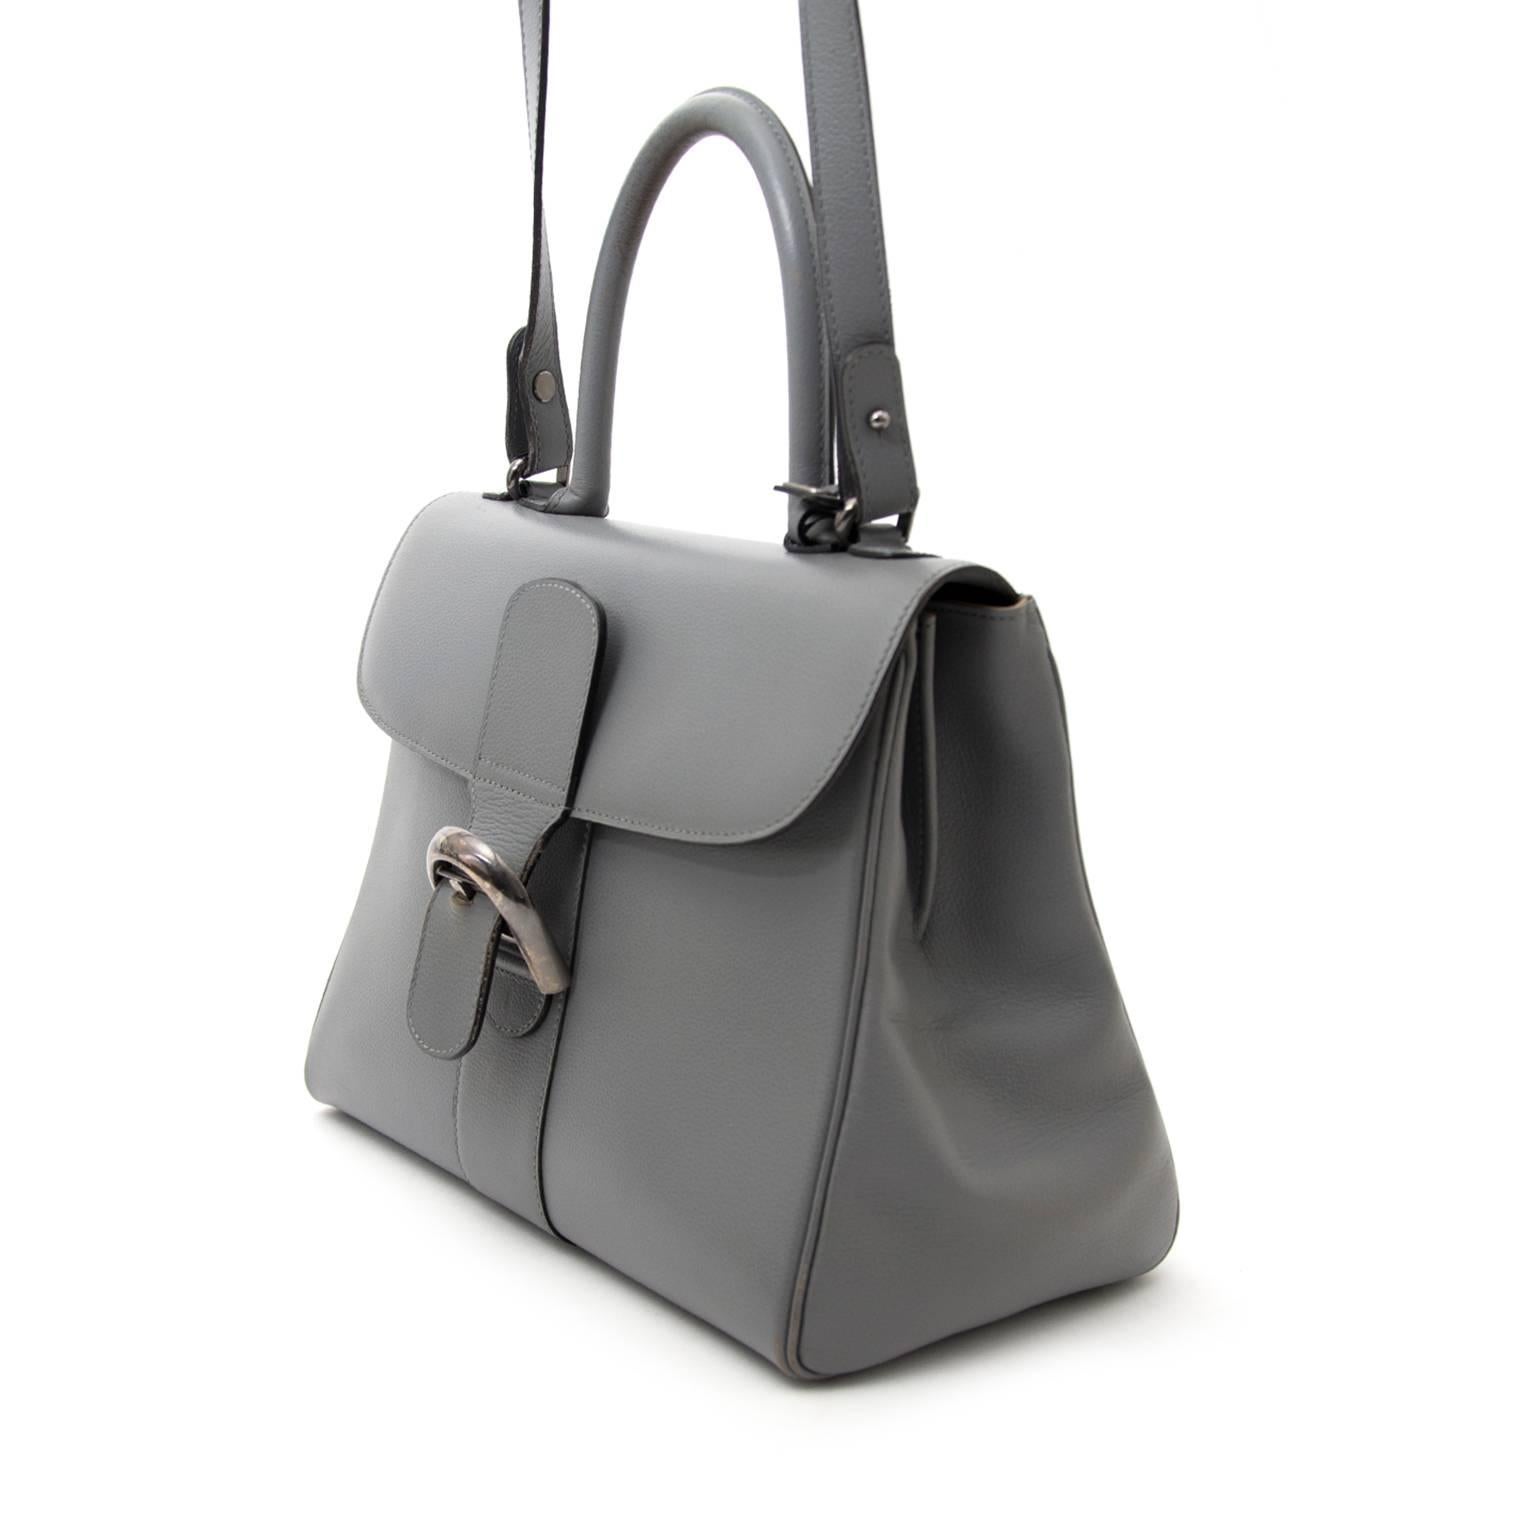 Delvaux Brillant Grey MM + Strap

This iconic Brillant comes in a contemporary edition: the pewter grey hardware and matte grey leather make a timeless combination.

The pebbled leather is both durable and sturdy, making this the perfect